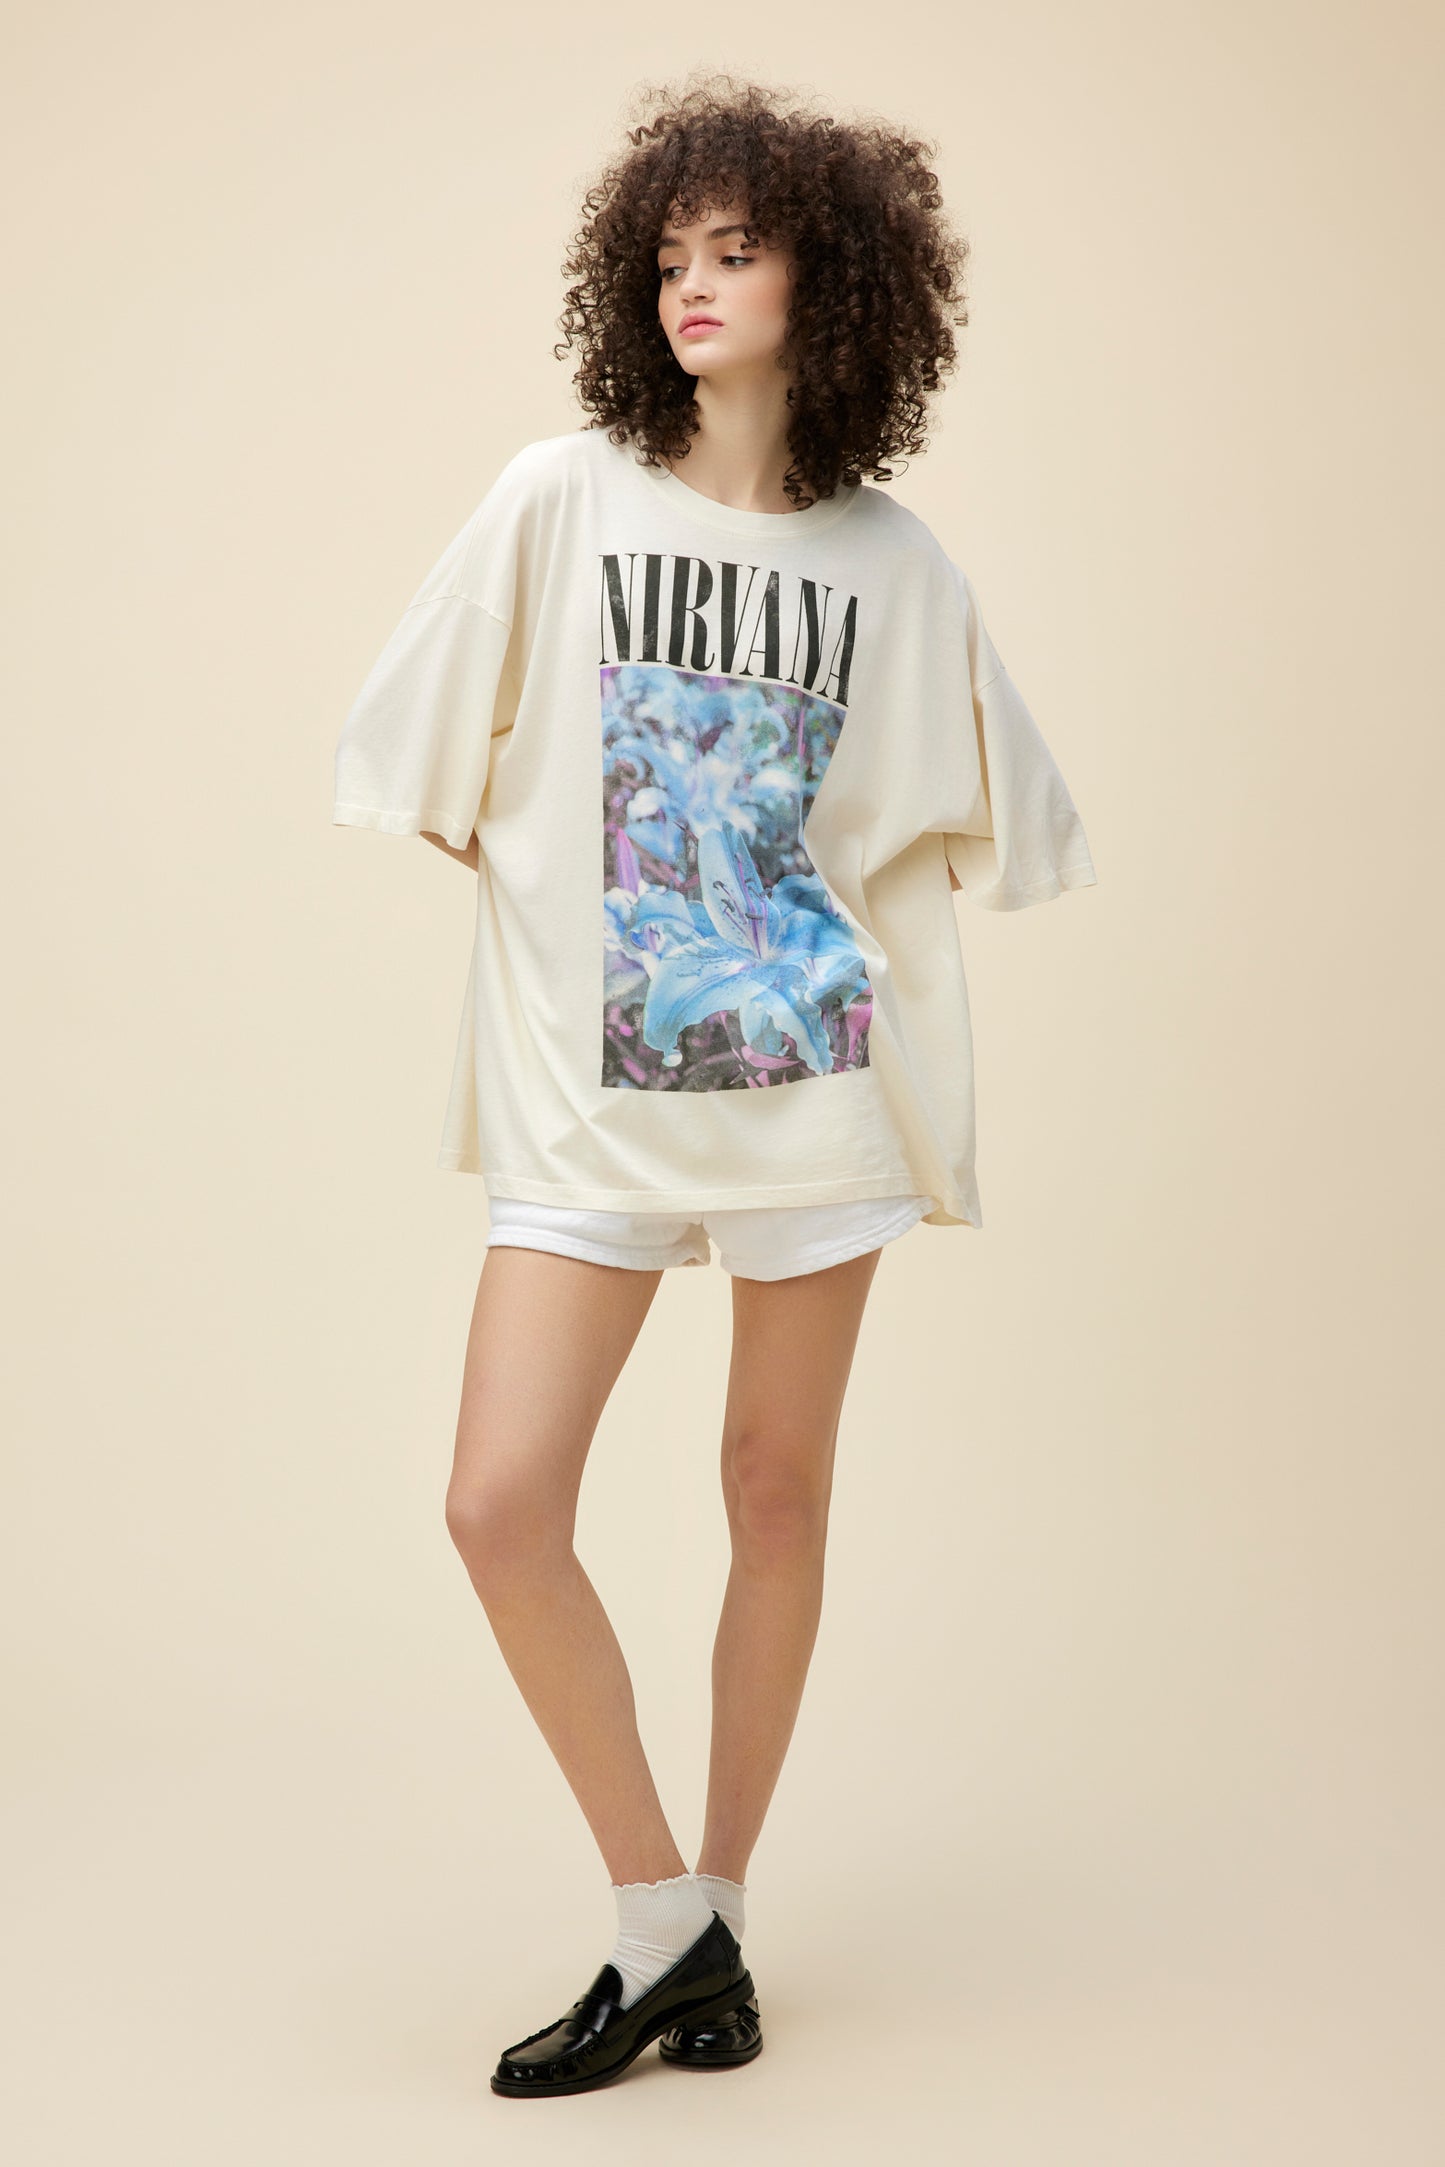 A model featuring a cream tee designed with a lily graphic and "Nirvana" in the center.